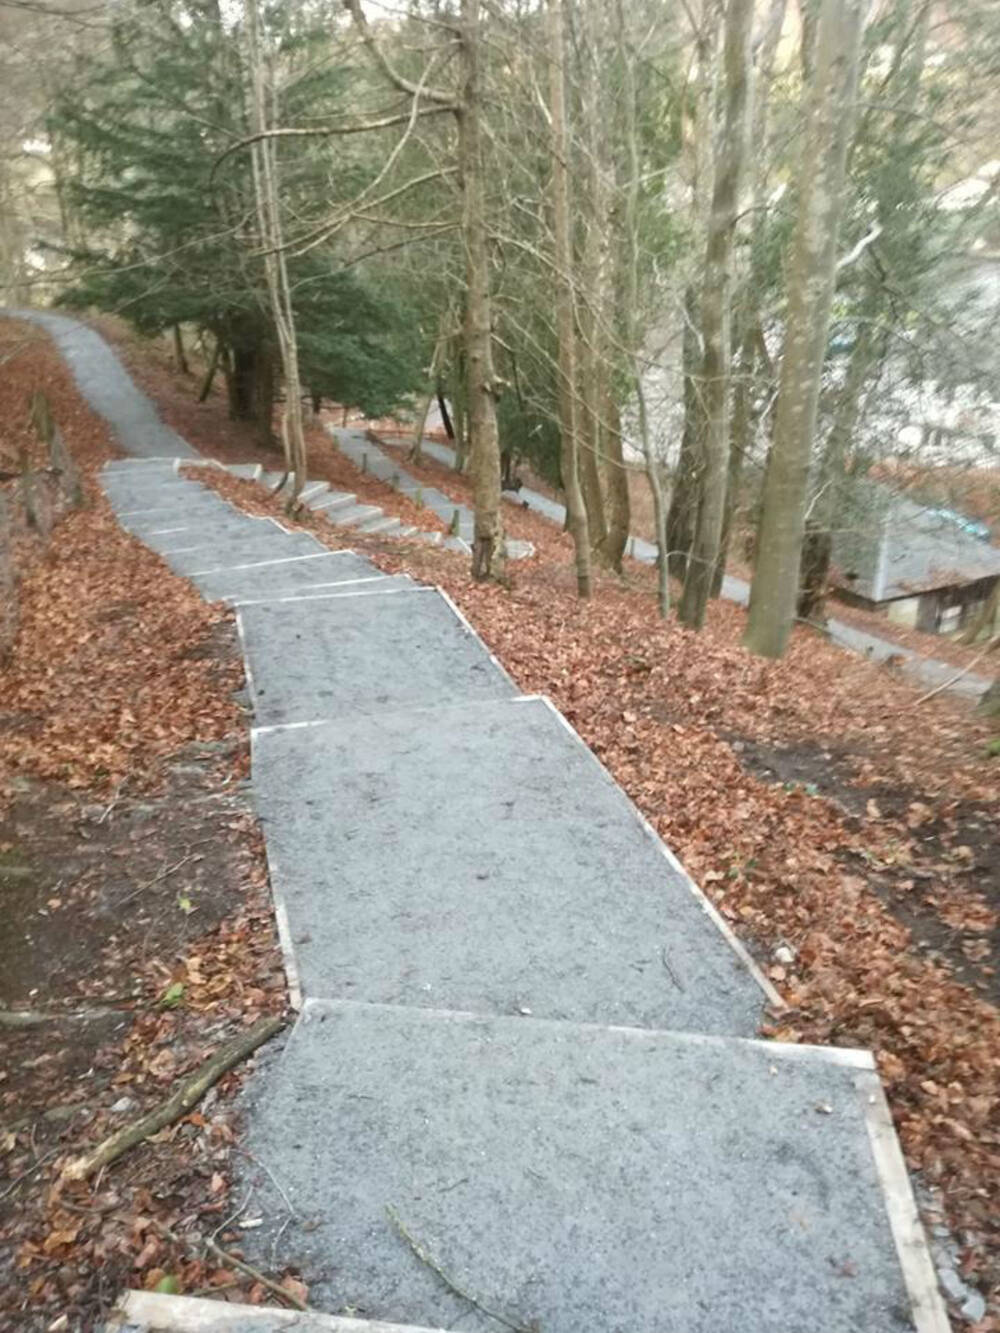 The new improved footpath